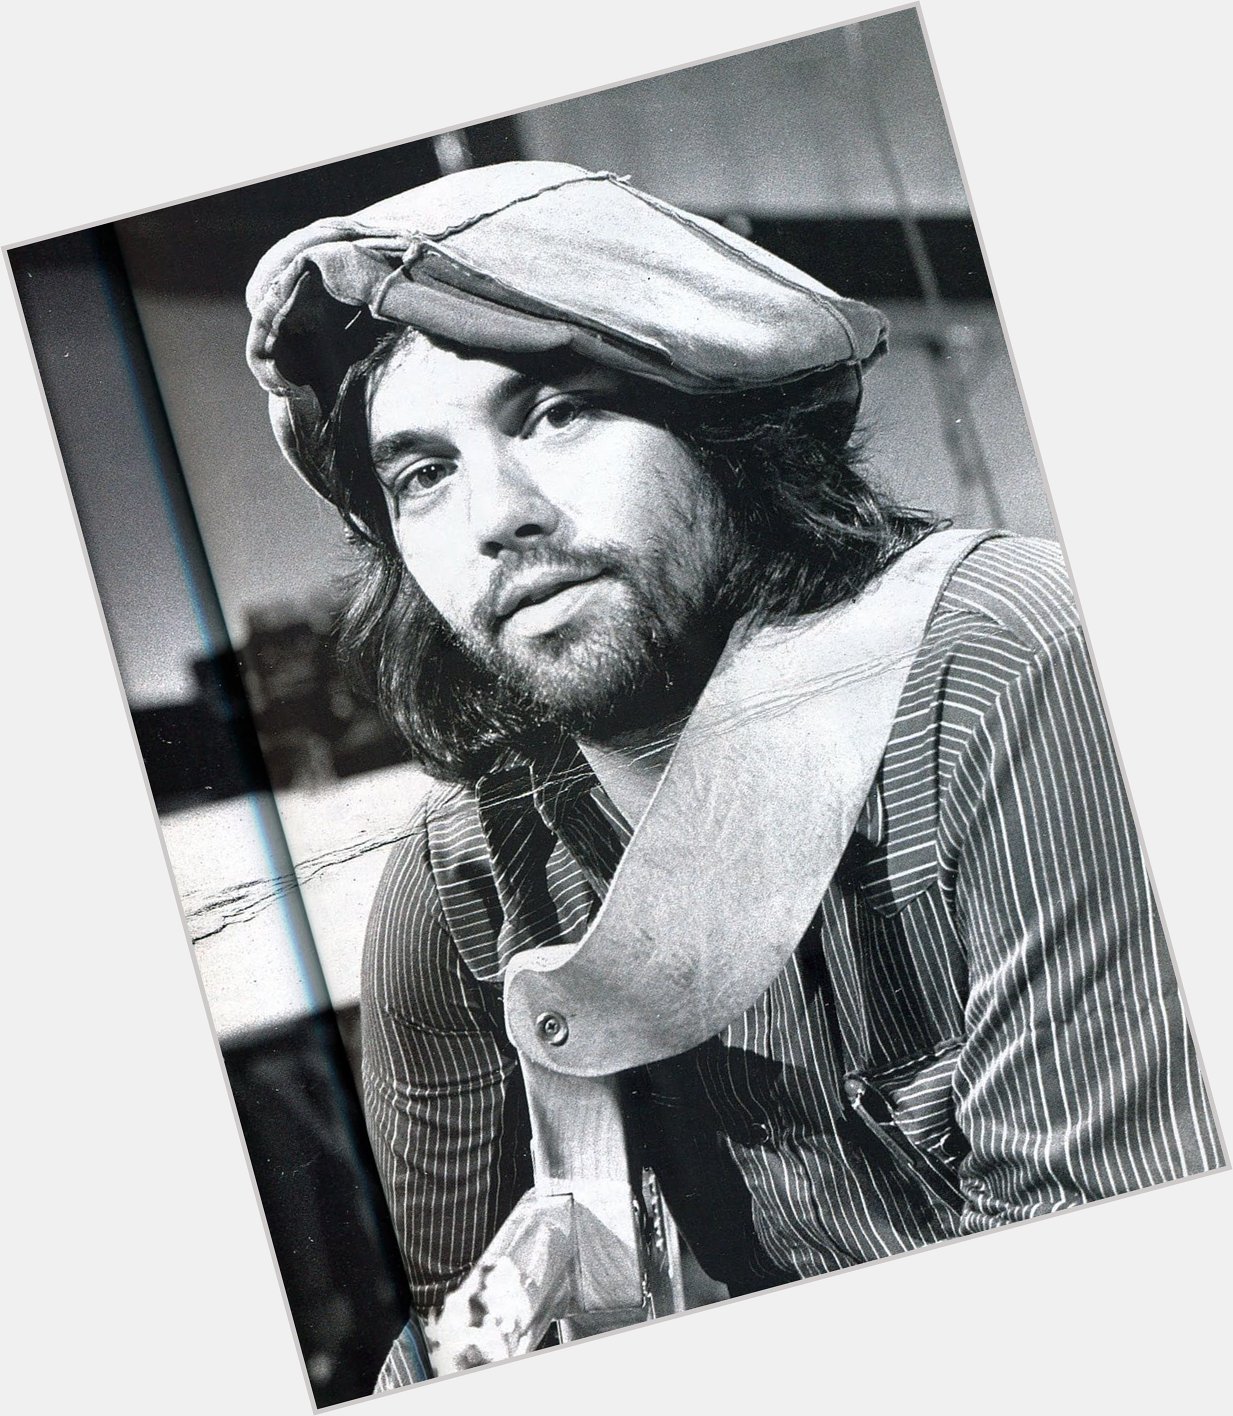 Happy Birthday to Little Feat\s Lowell George, born April 13!
\"Dixie Chicken\" 